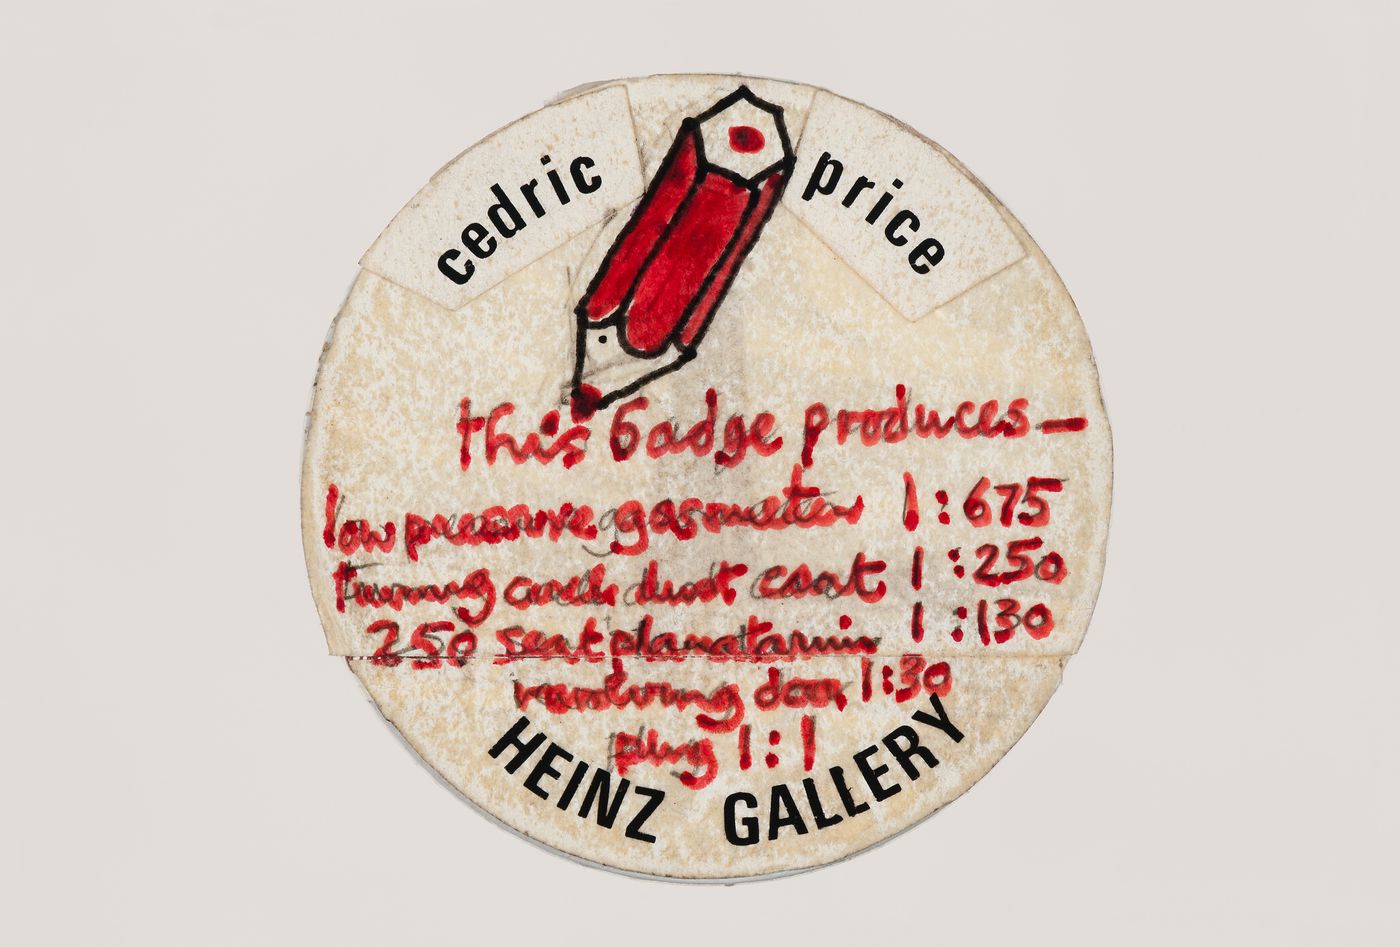 Original for a badge produced in conjunction with the exhibition "Cedric Price": the evolving image, presented at the Royal Institute of British Architects October 8-November 29, 1975